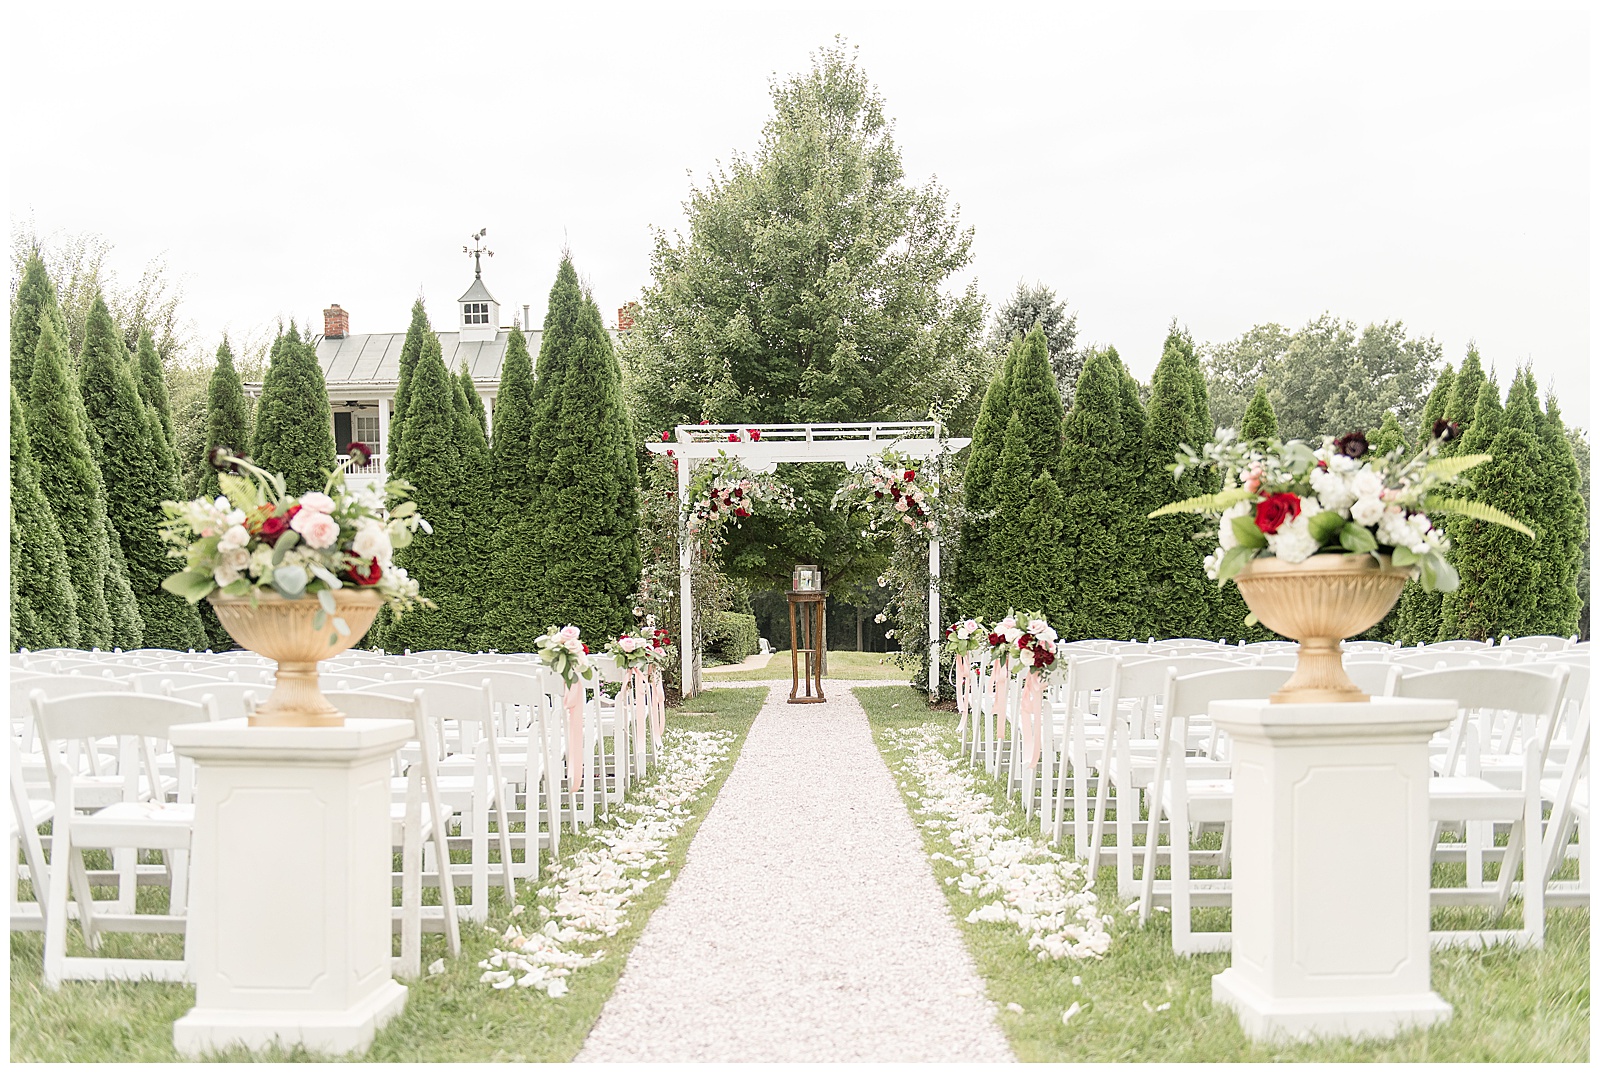 outdoor wedding area with rows of white chairs and beautiful white archway on wedding day at Antrim 1844 in Maryland